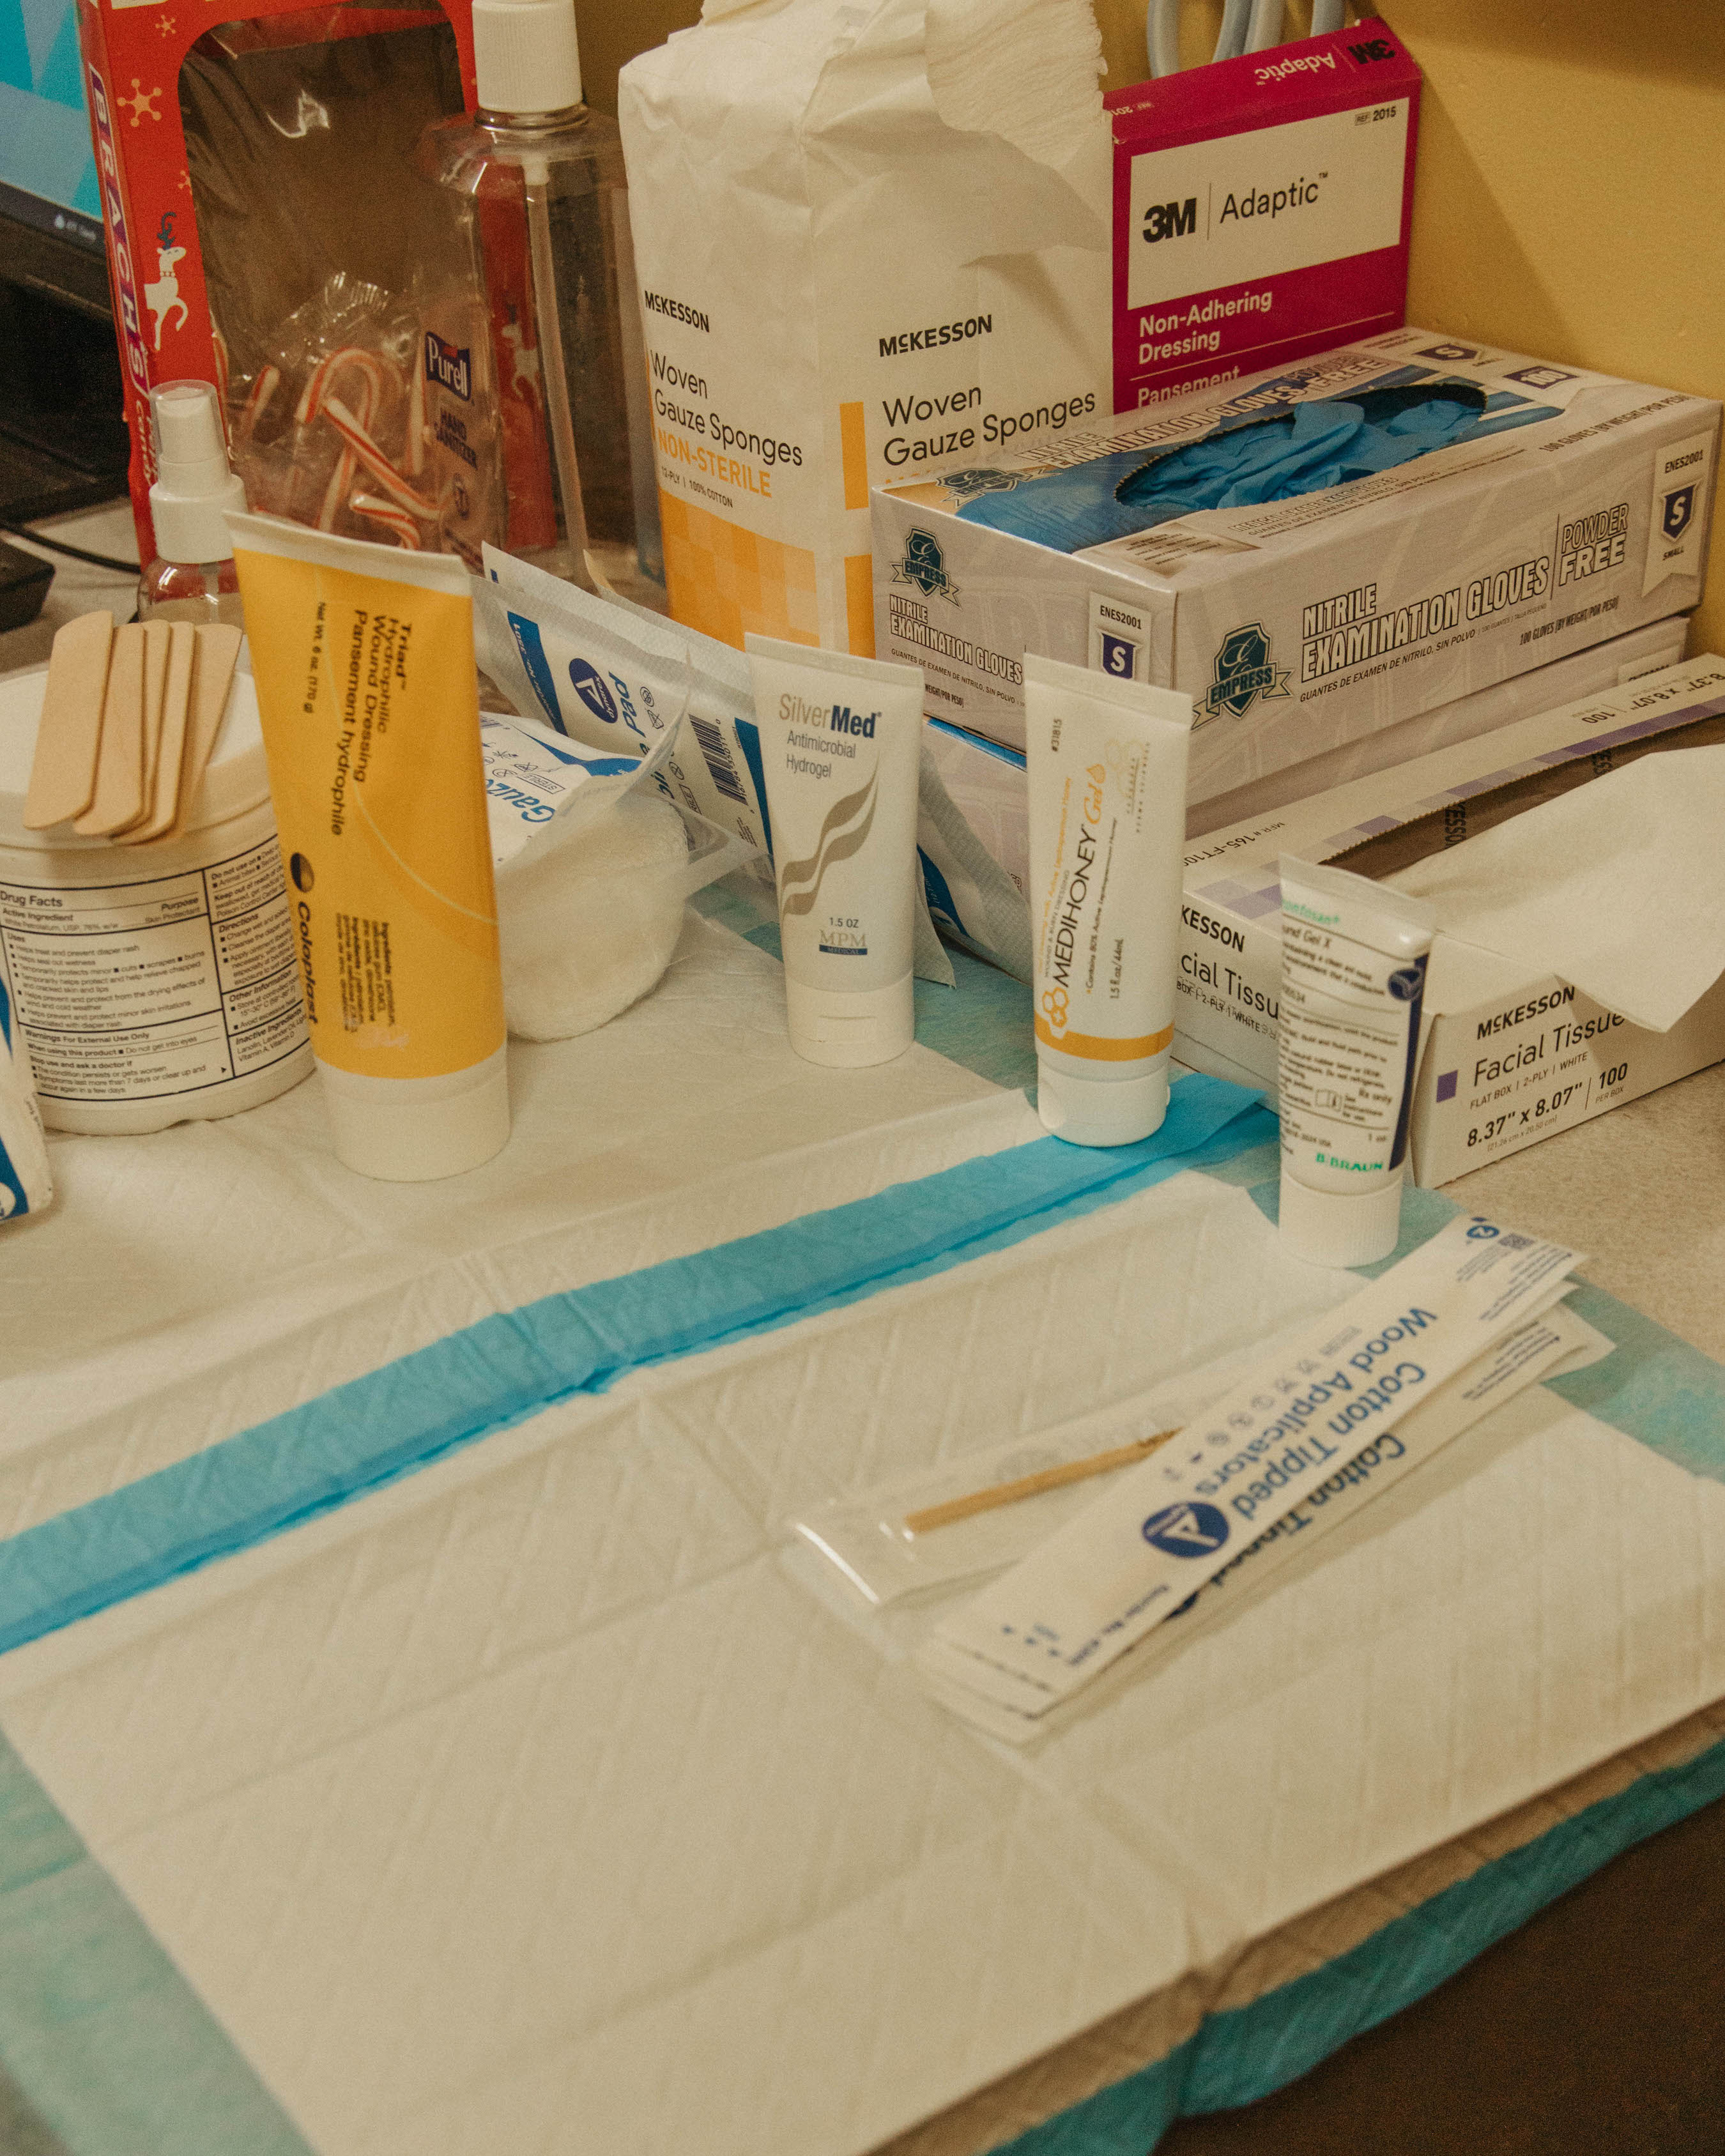 Wound care supplies arranged on a table